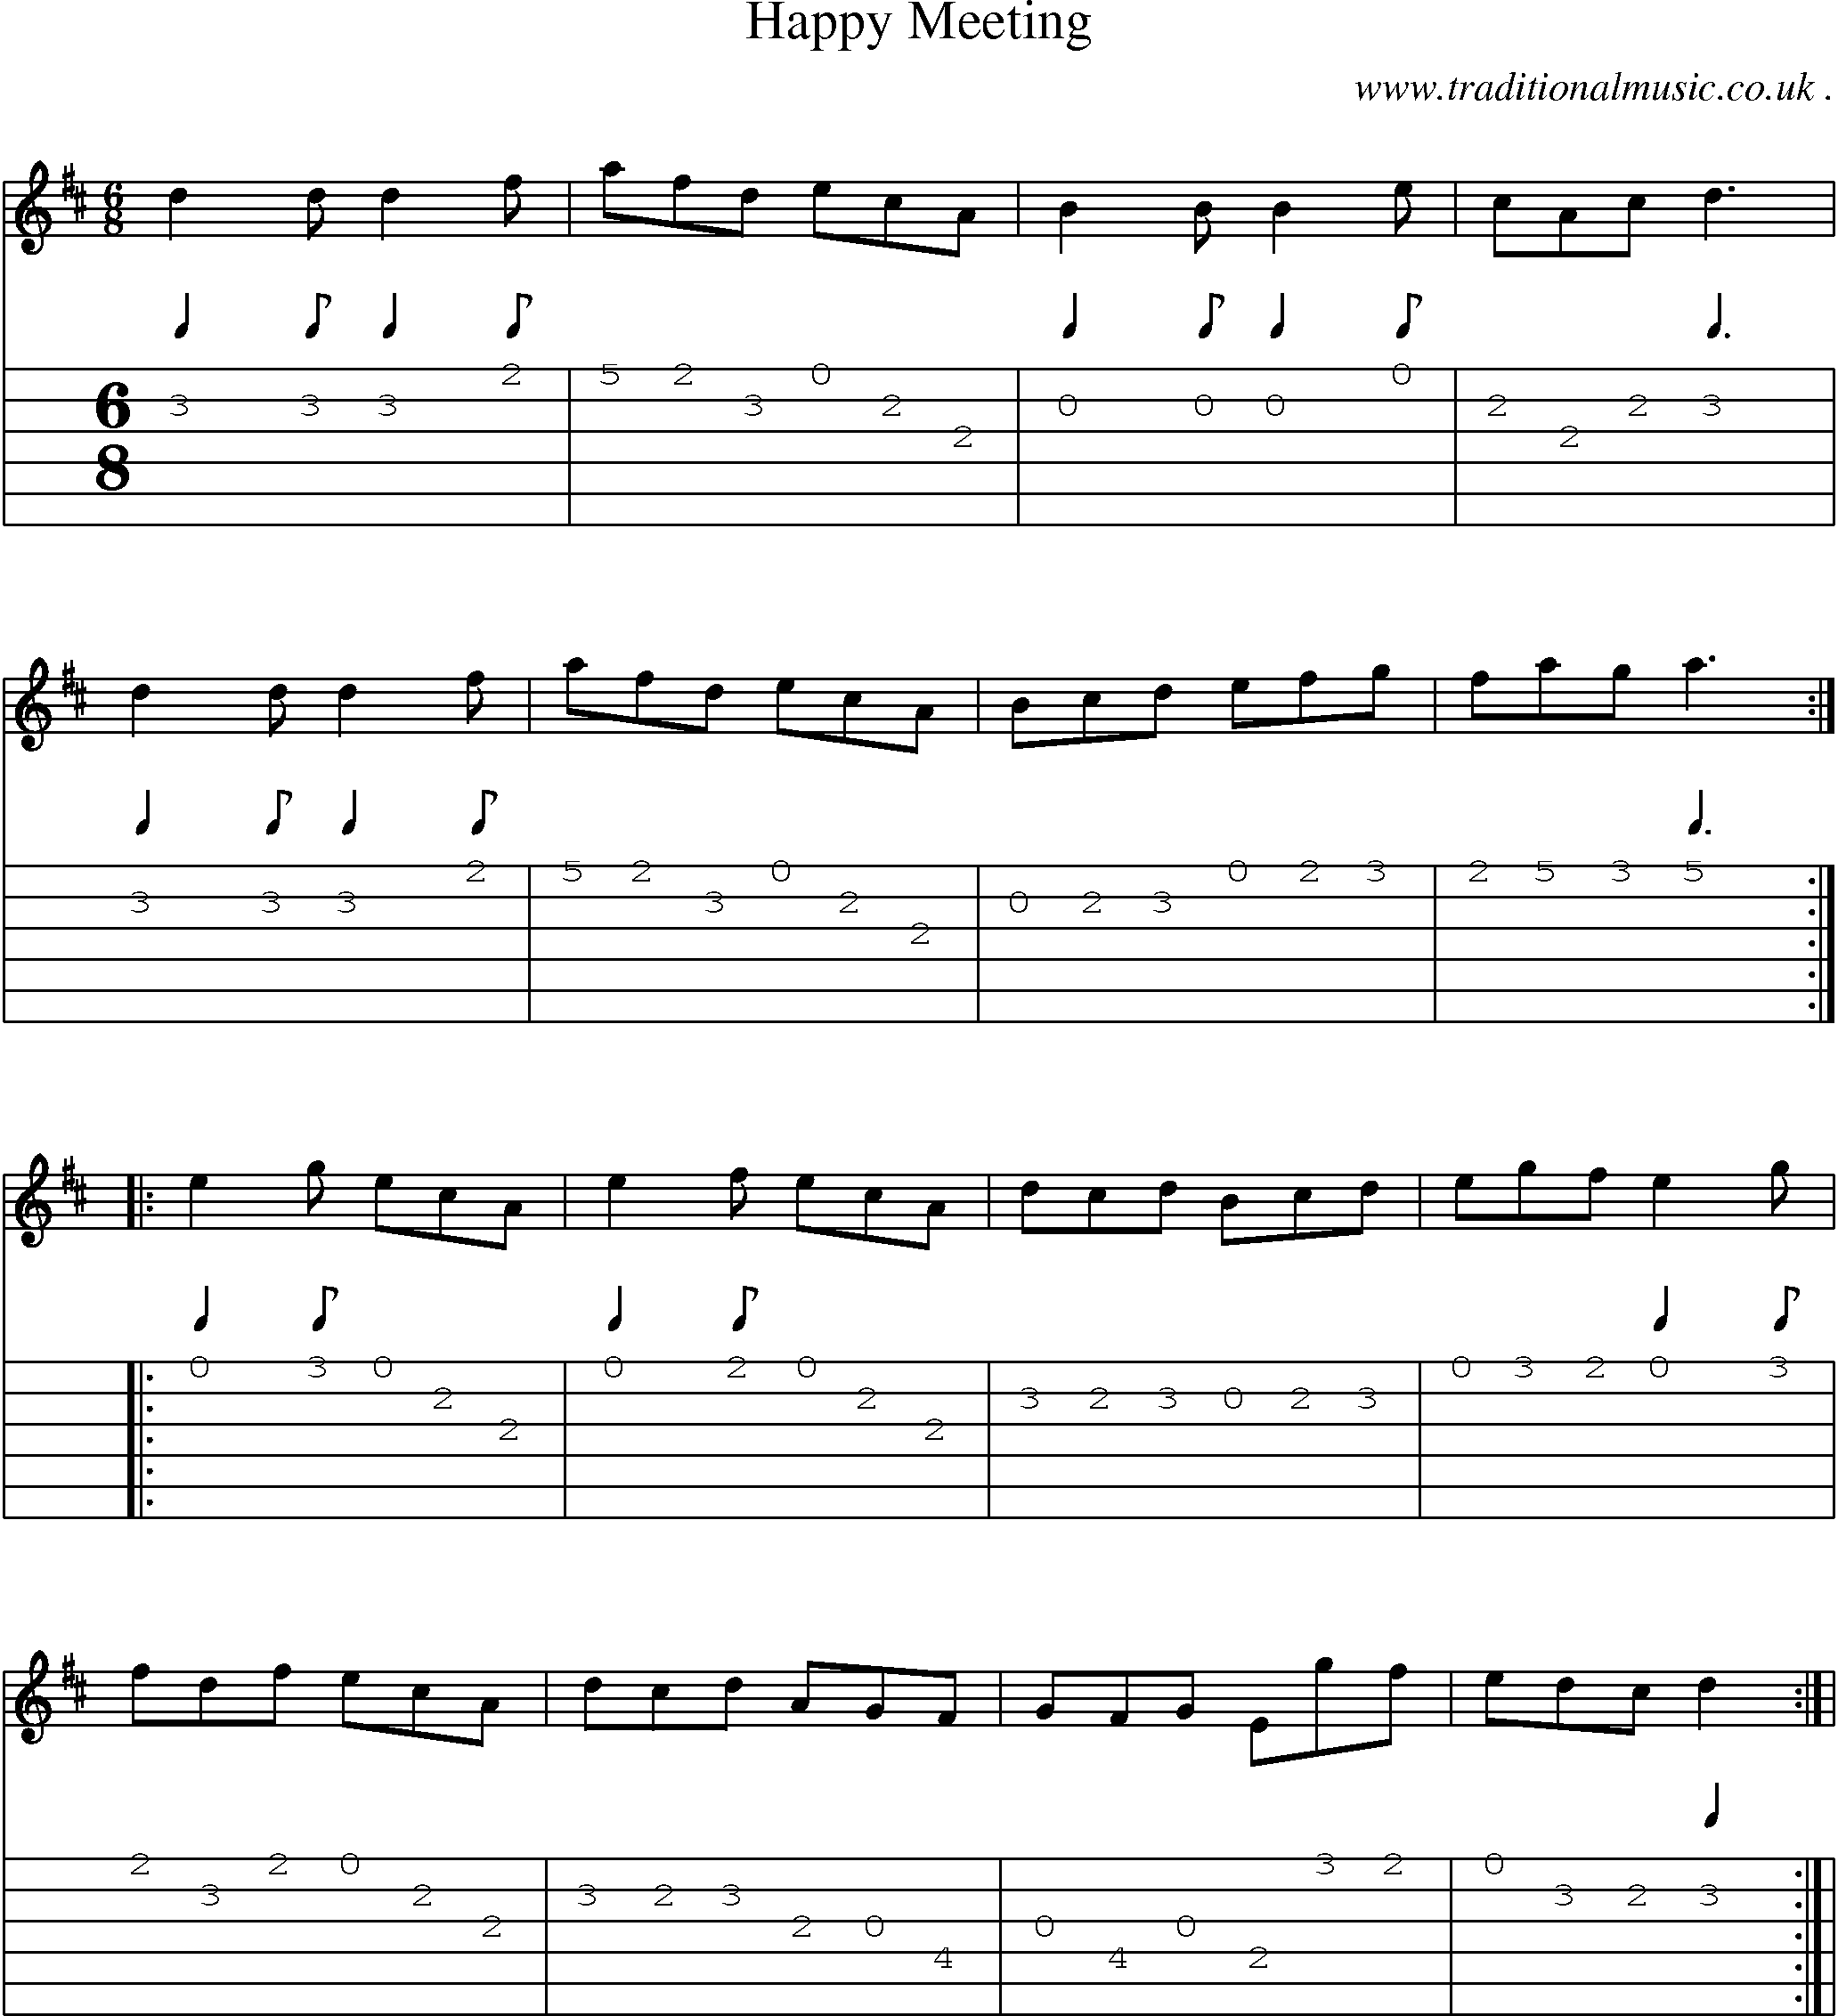 Sheet-Music and Guitar Tabs for Happy Meeting